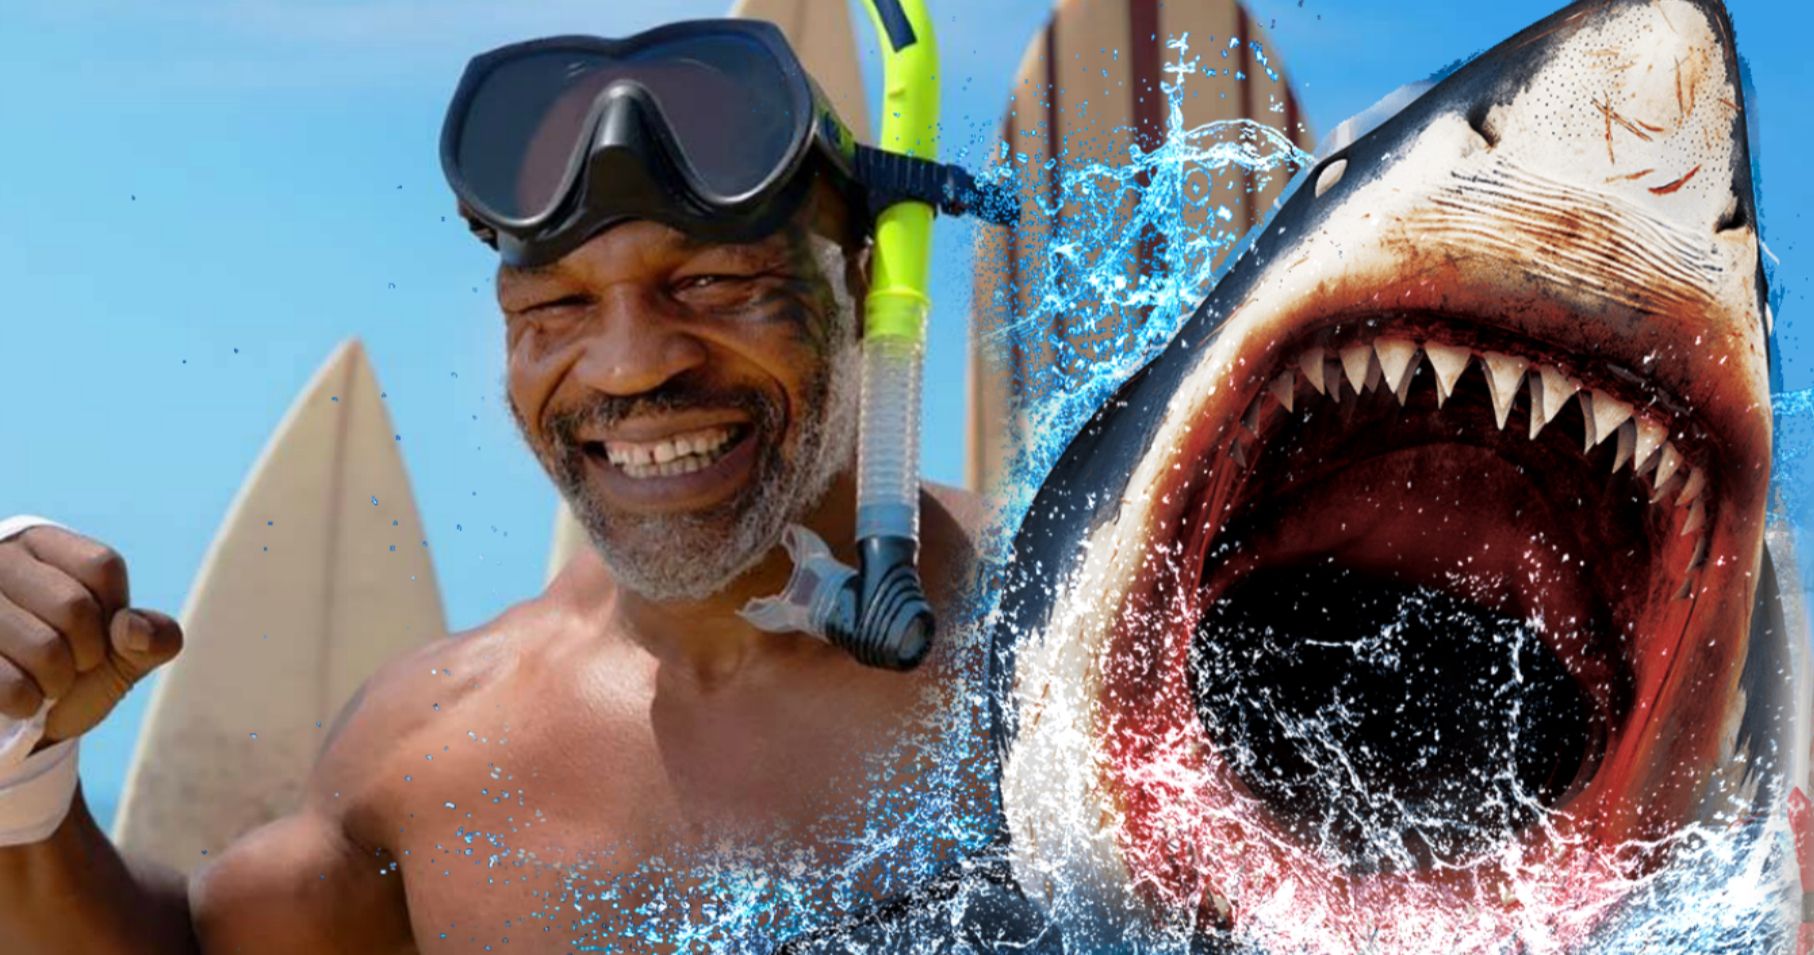 Tyson Vs. Jaws Trailer Has Iron Mike Ready to Fight a Great White for Shark Week